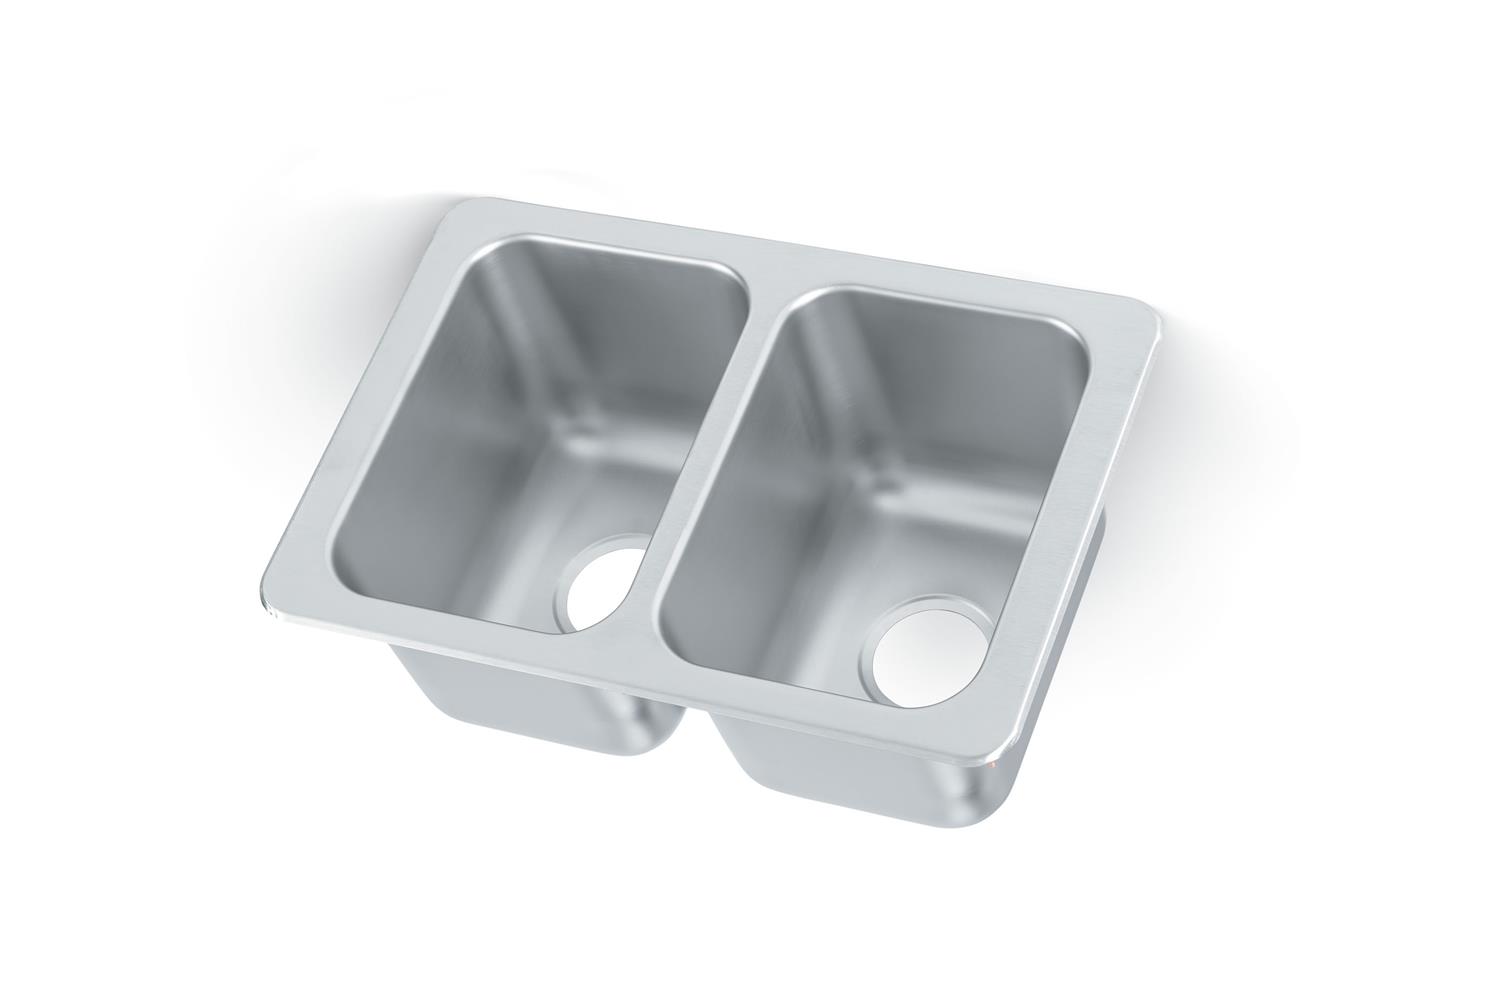 Vollrath 102-1-1 Self-Rimming Double bowl sink